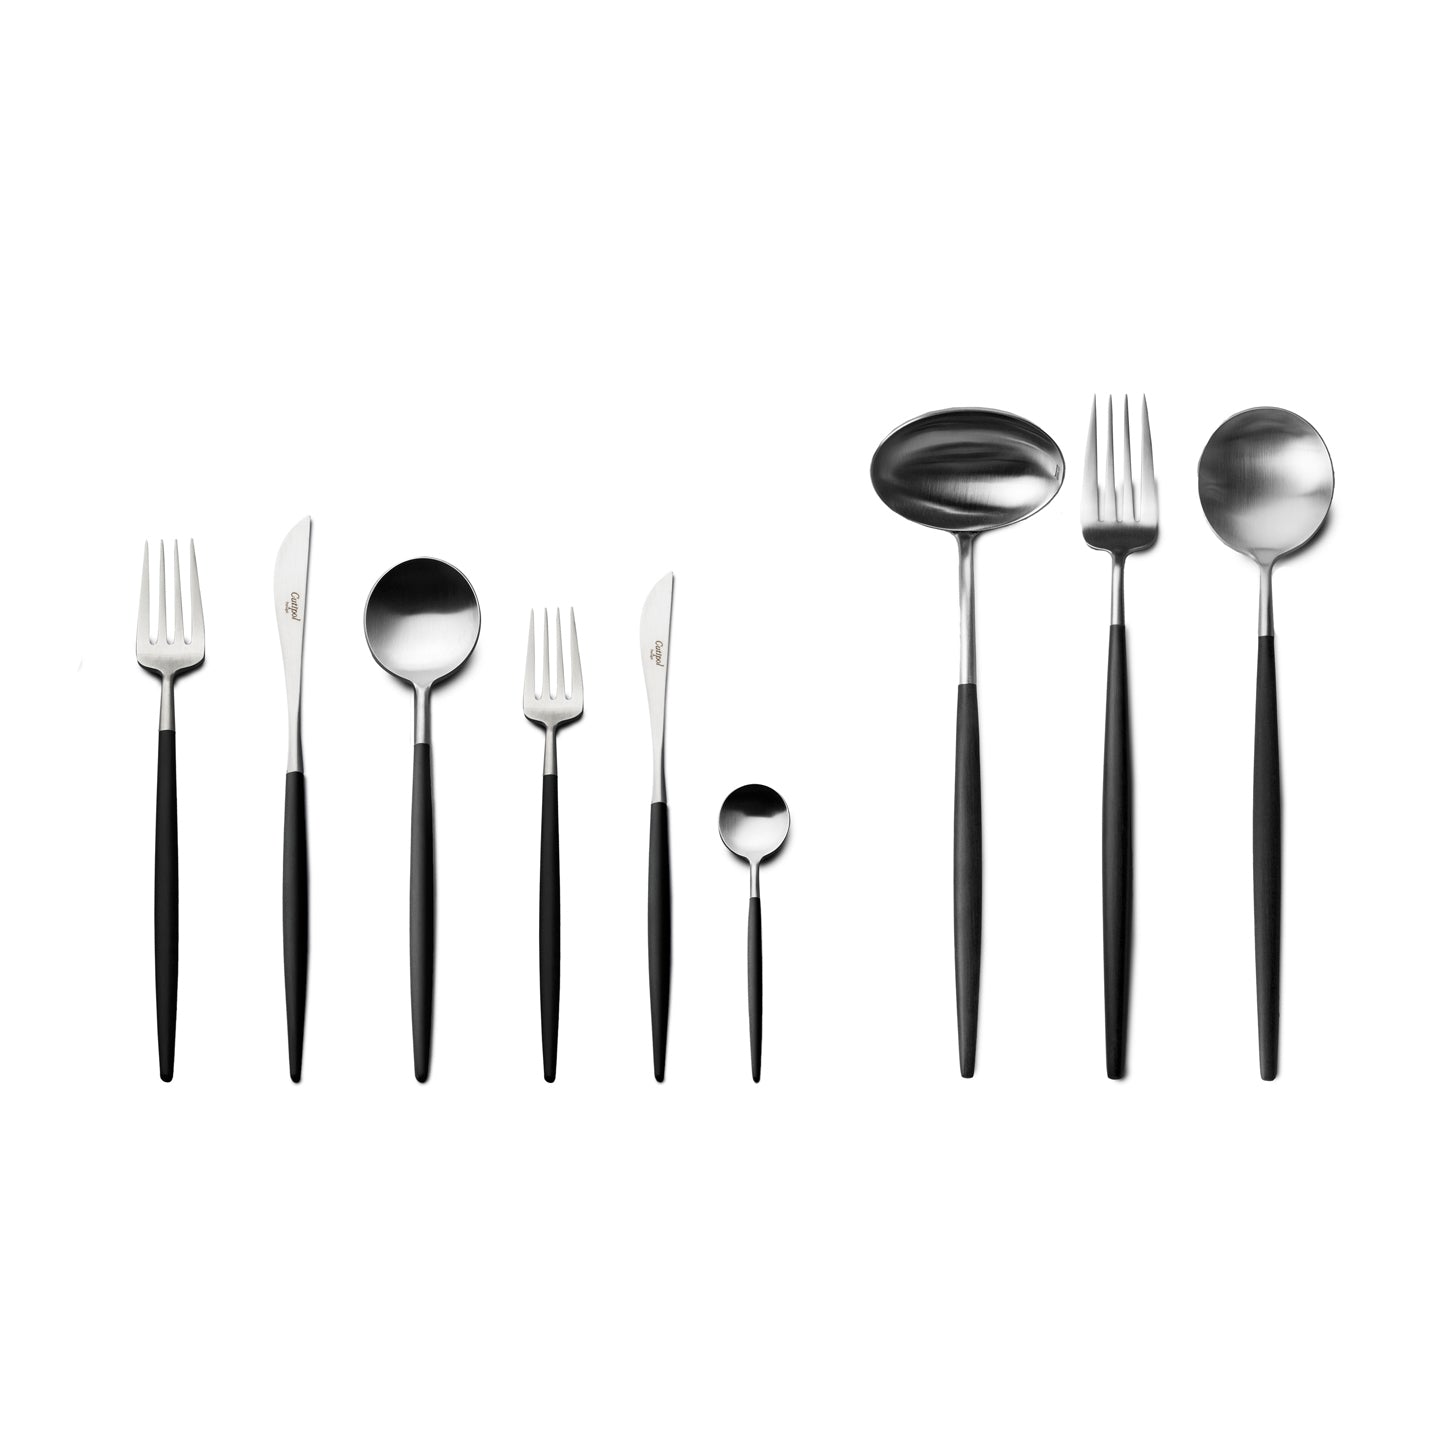 Cutipol Goa 75 Piece Cutlery Set / Black and Stainless Steel